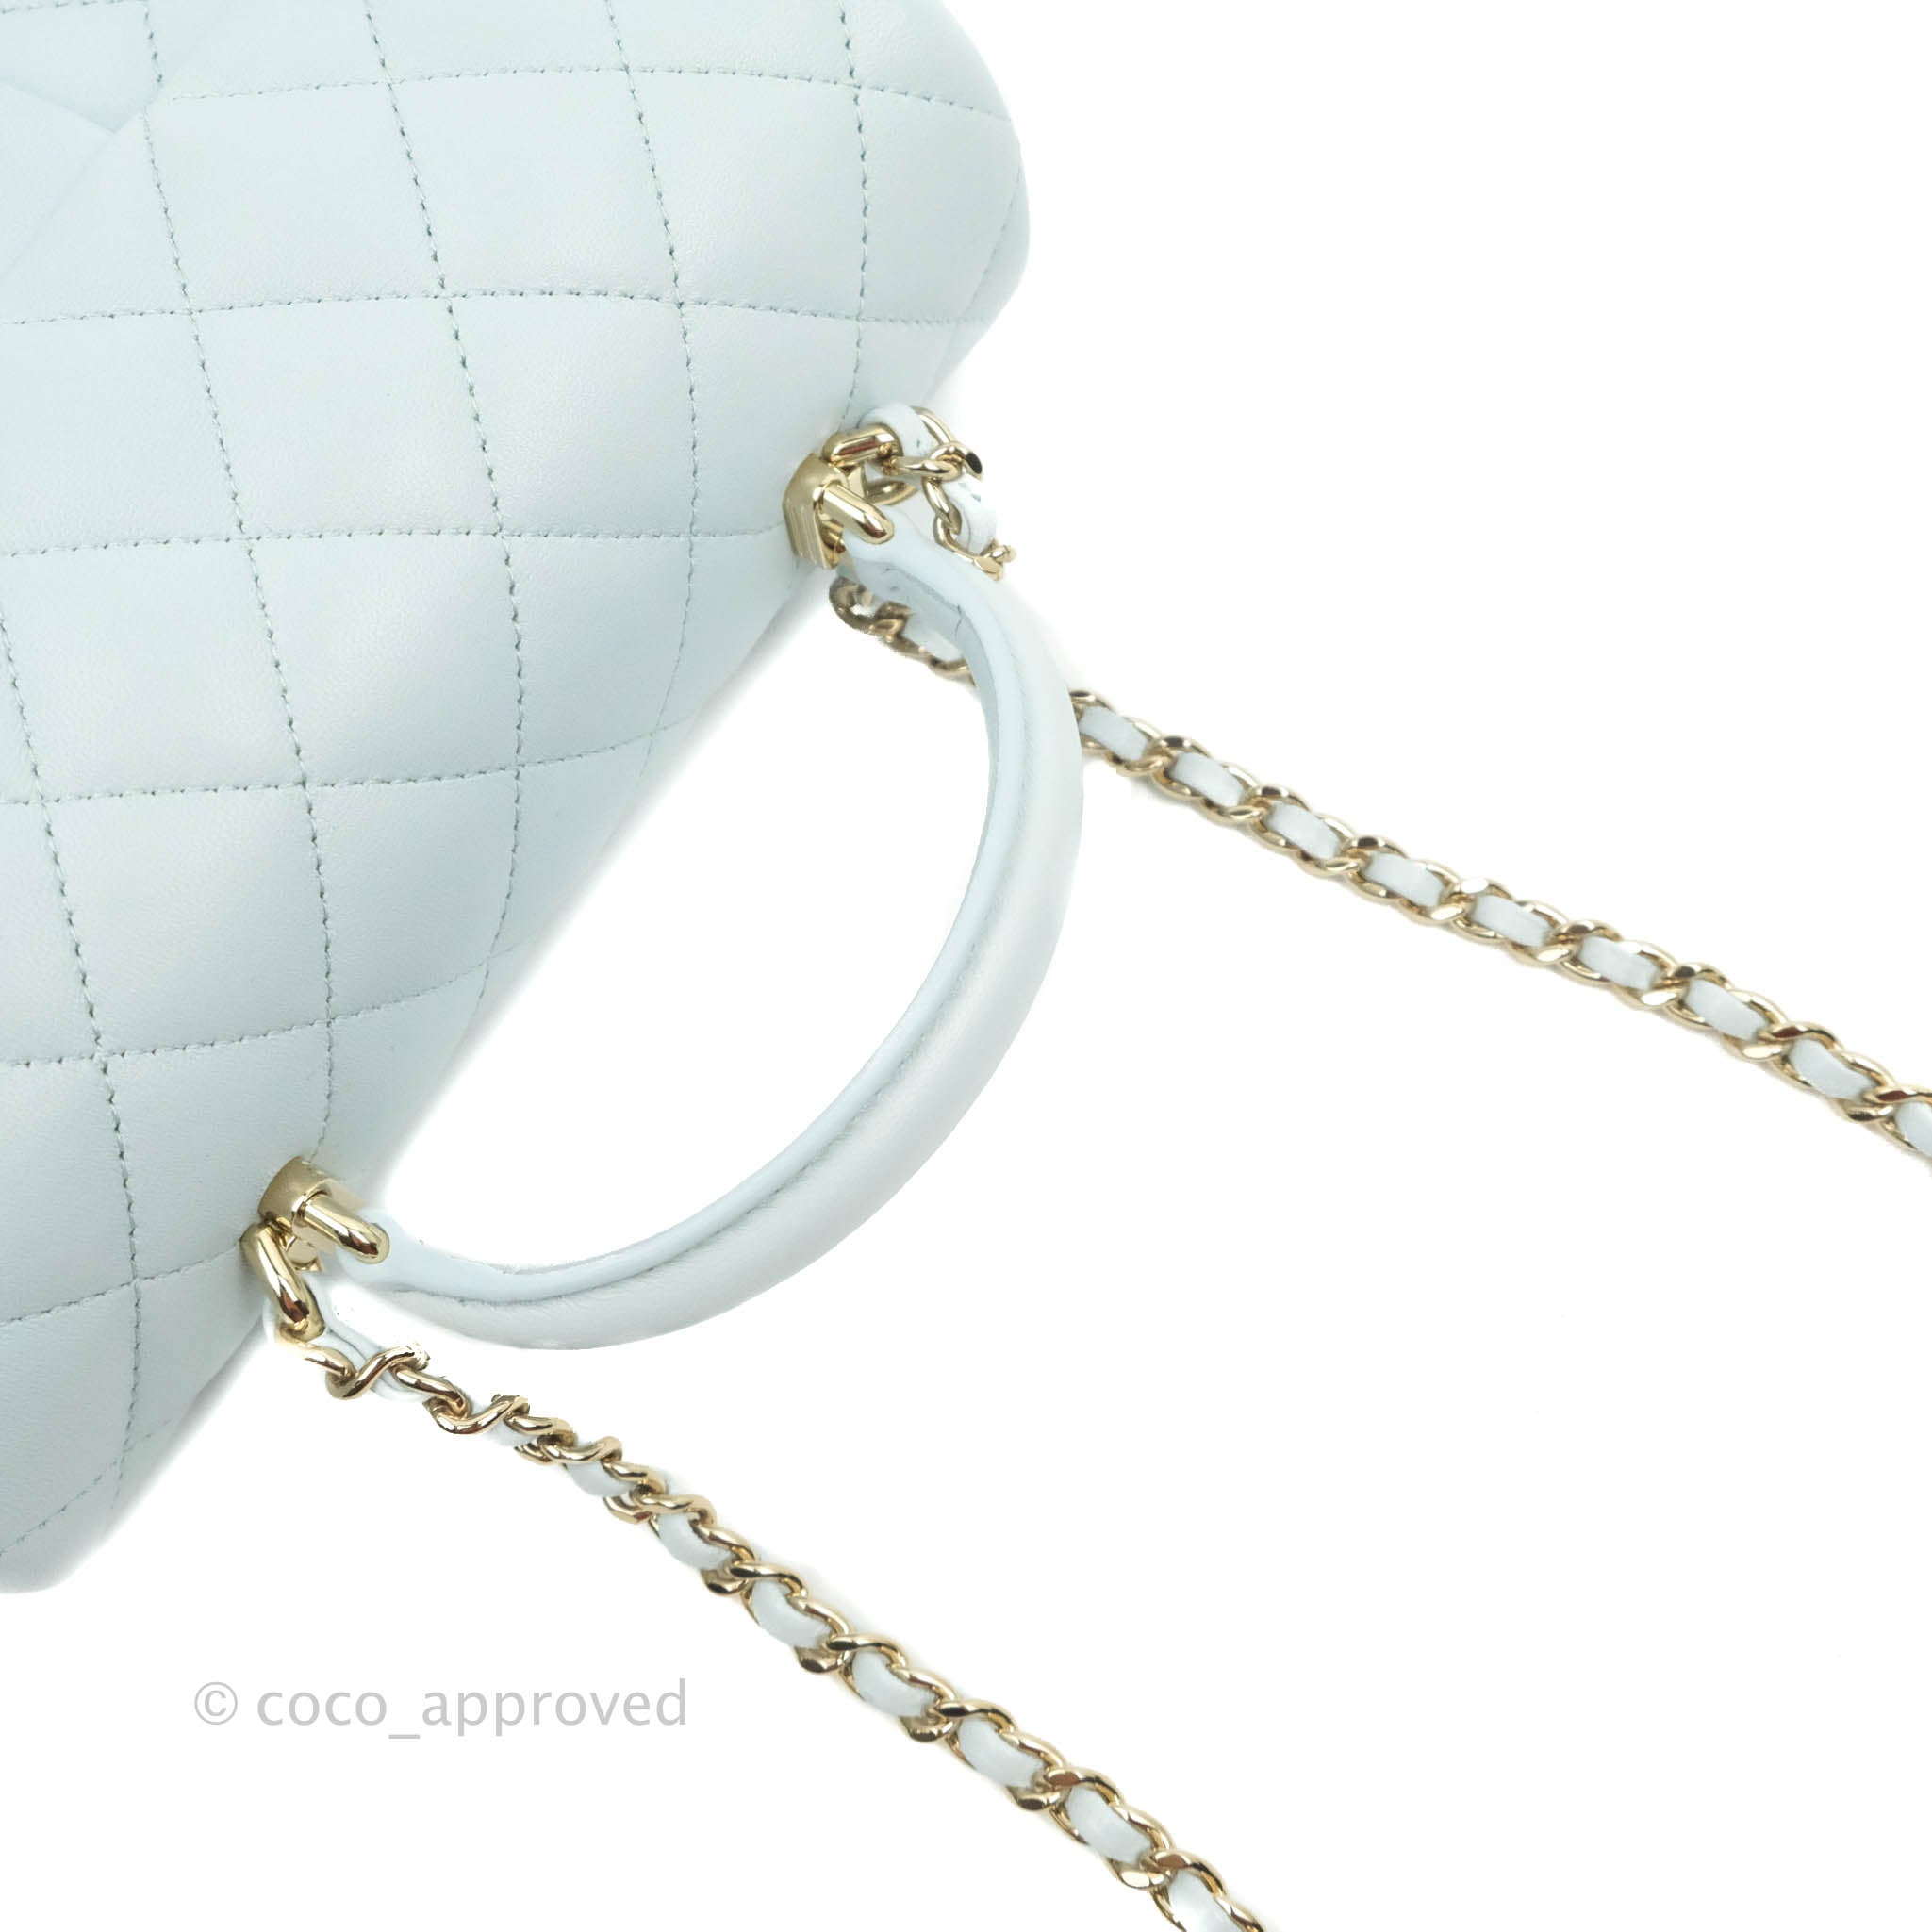 Chanel Blue Quilted Lambskin Ribbon Chain Flap Bag Small Q6B4HZ1IBH000